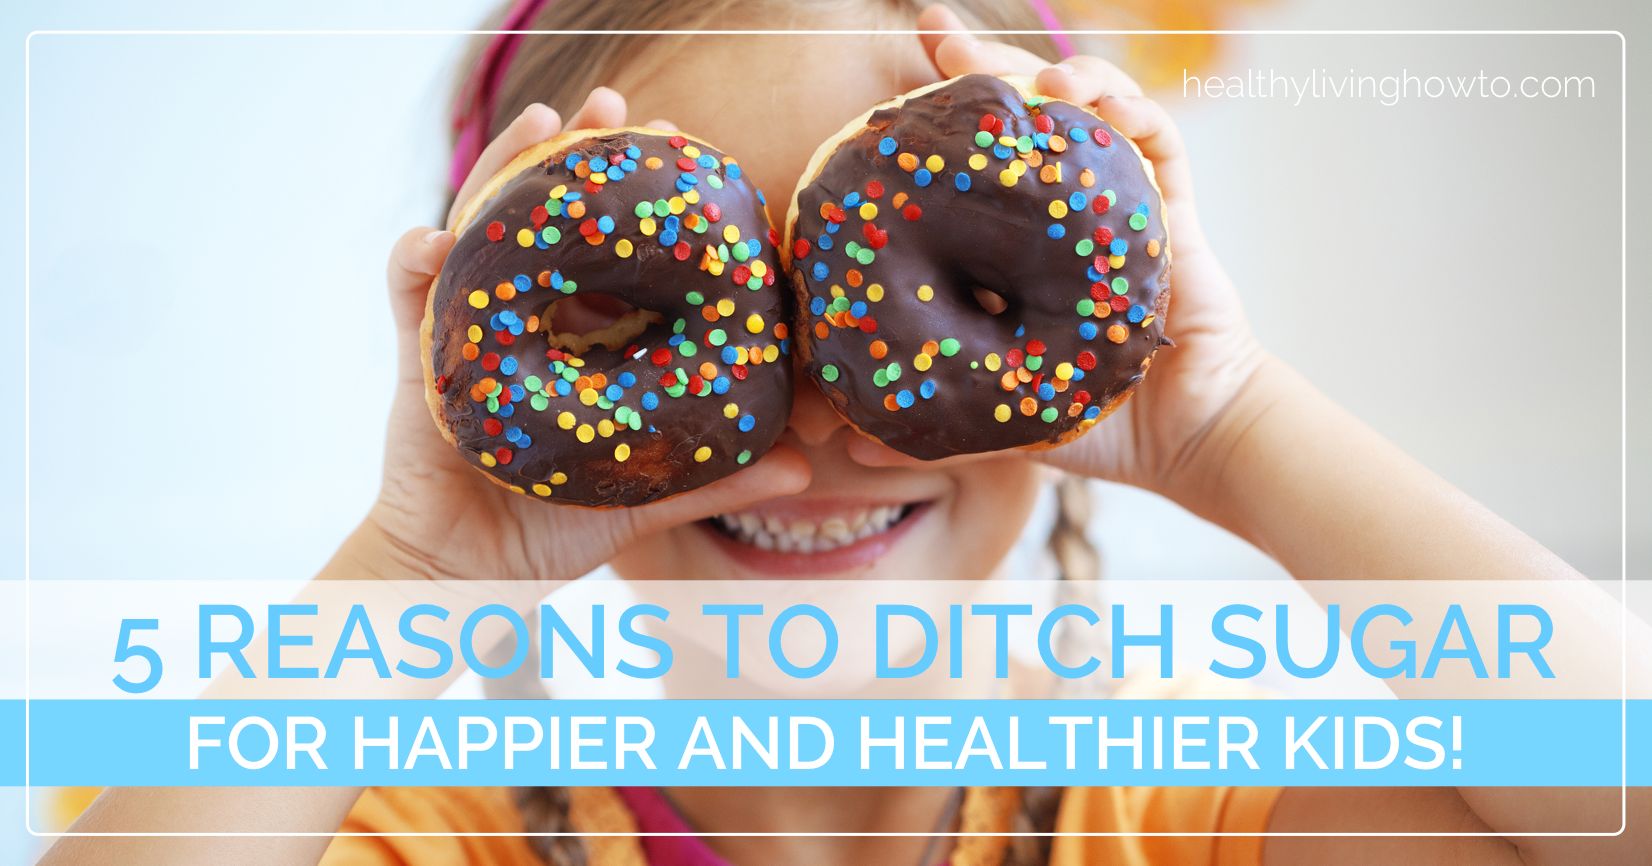 5 Reasons to Ditch Sugar For Happier & Healthier Kids | healthylivinghowto.com